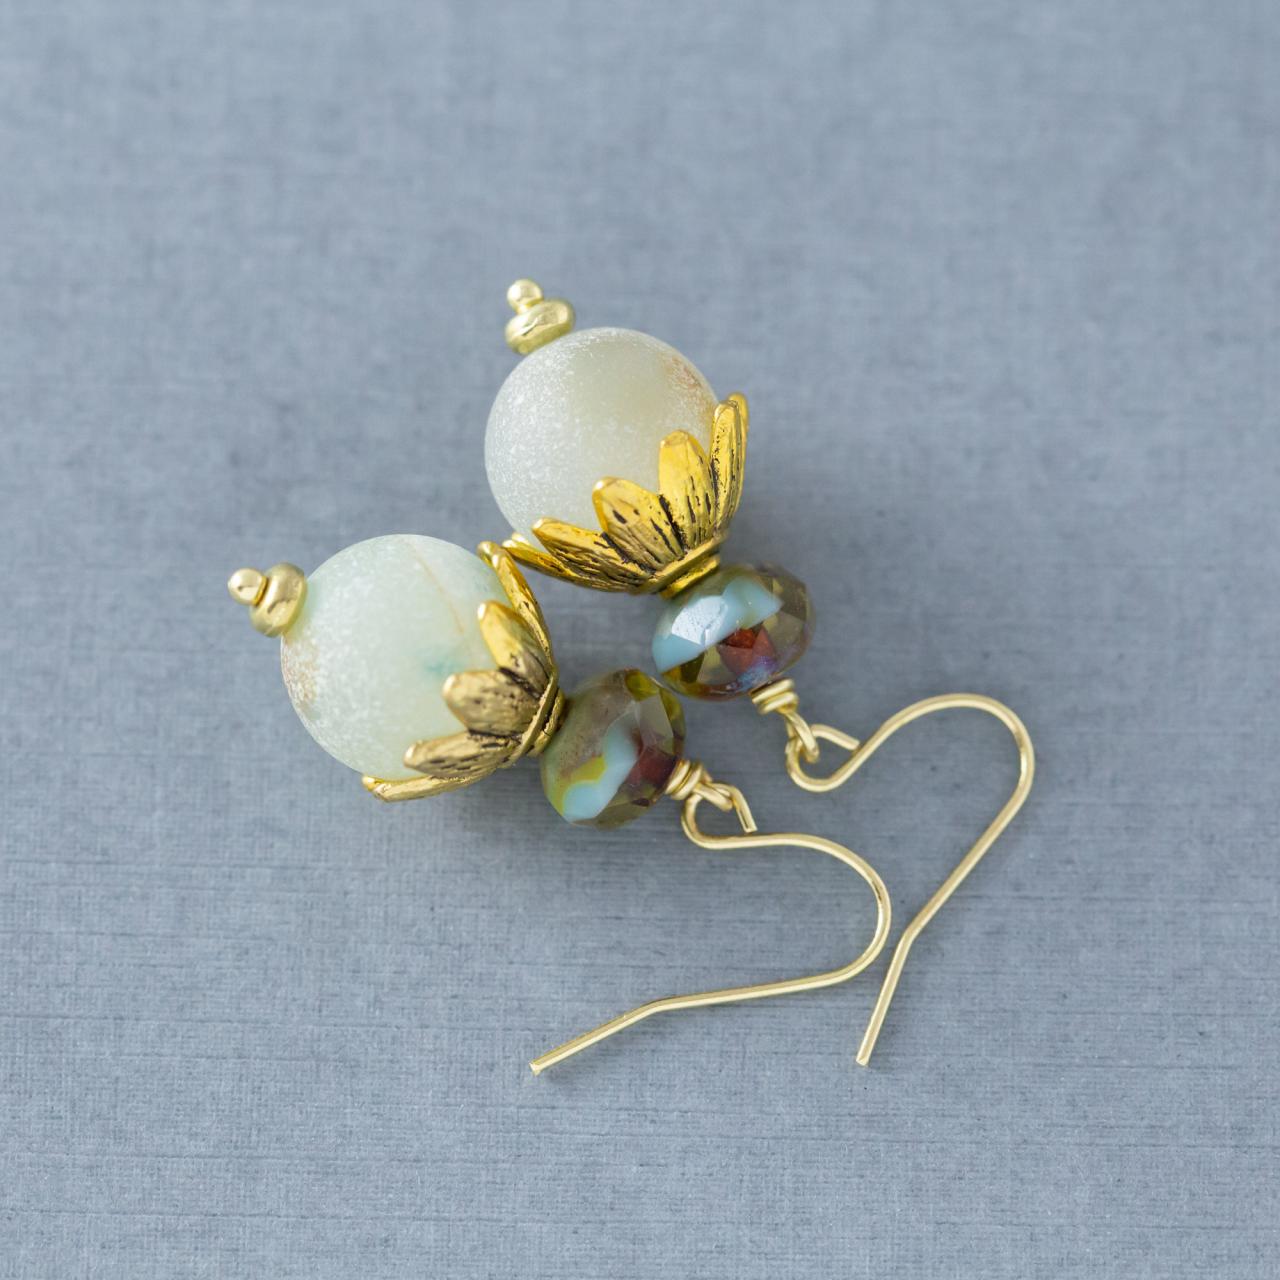 Light Blue Grey Agate & Czech Bead Dangle Earrings With Gold Tone Floral Bead Caps, Agate Jewelry